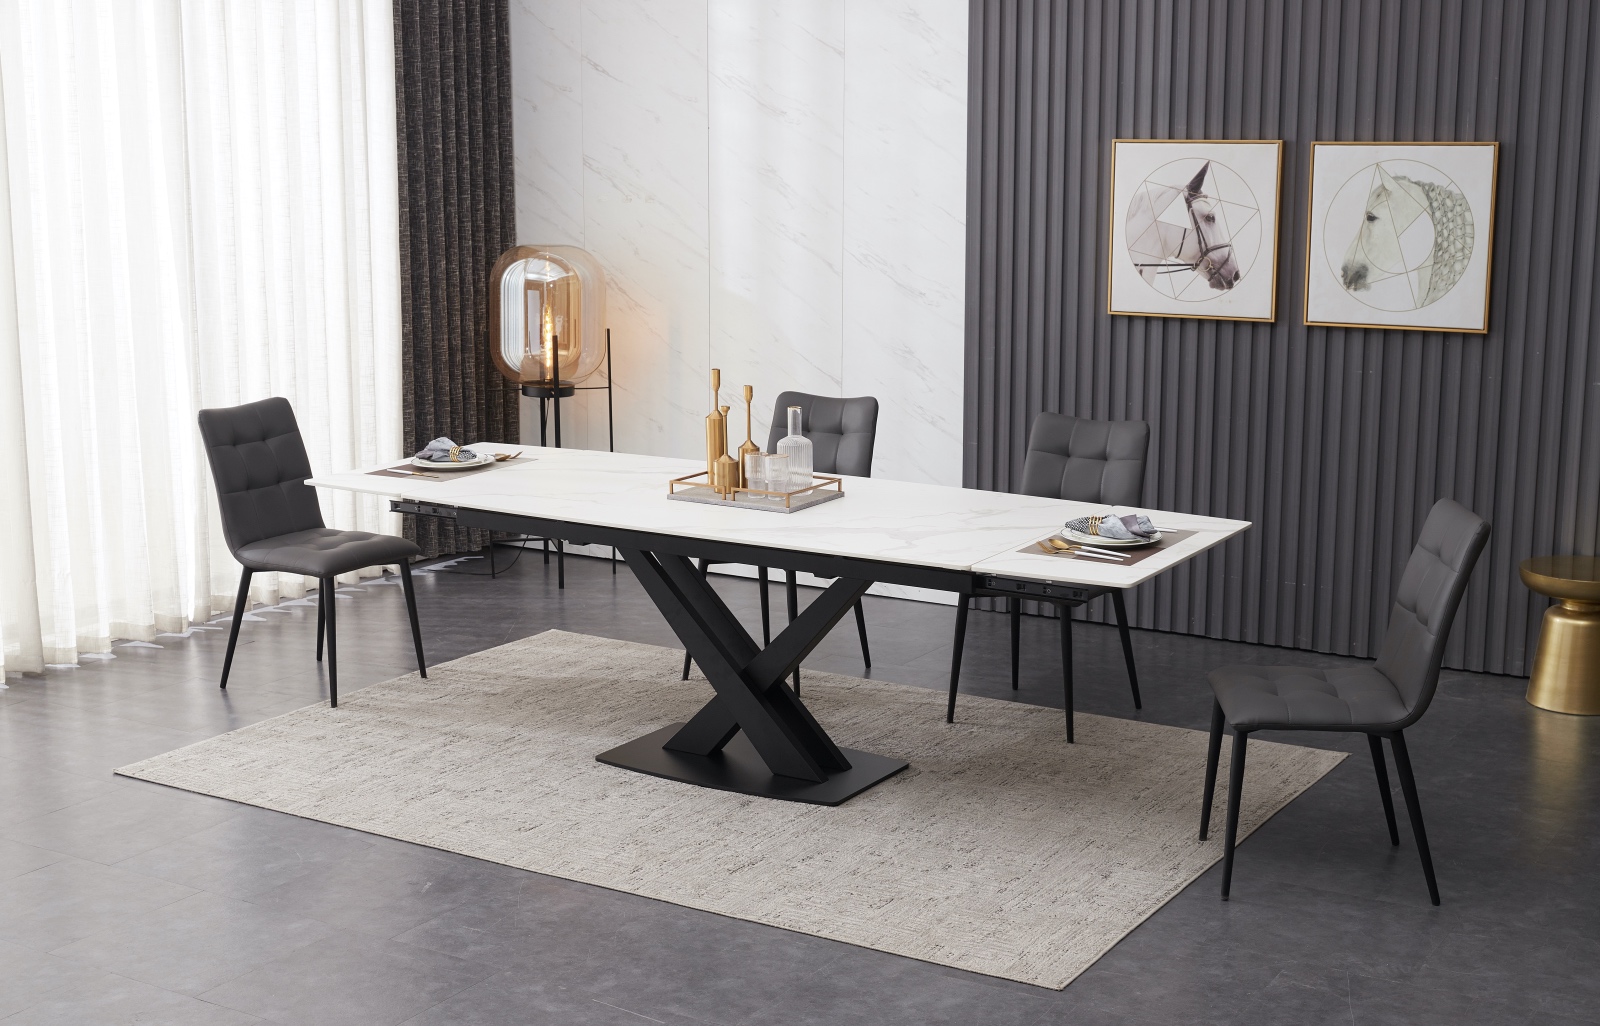 Ceramic White Extending Dining Table, Grey Dining Room Table With Leather Chairs